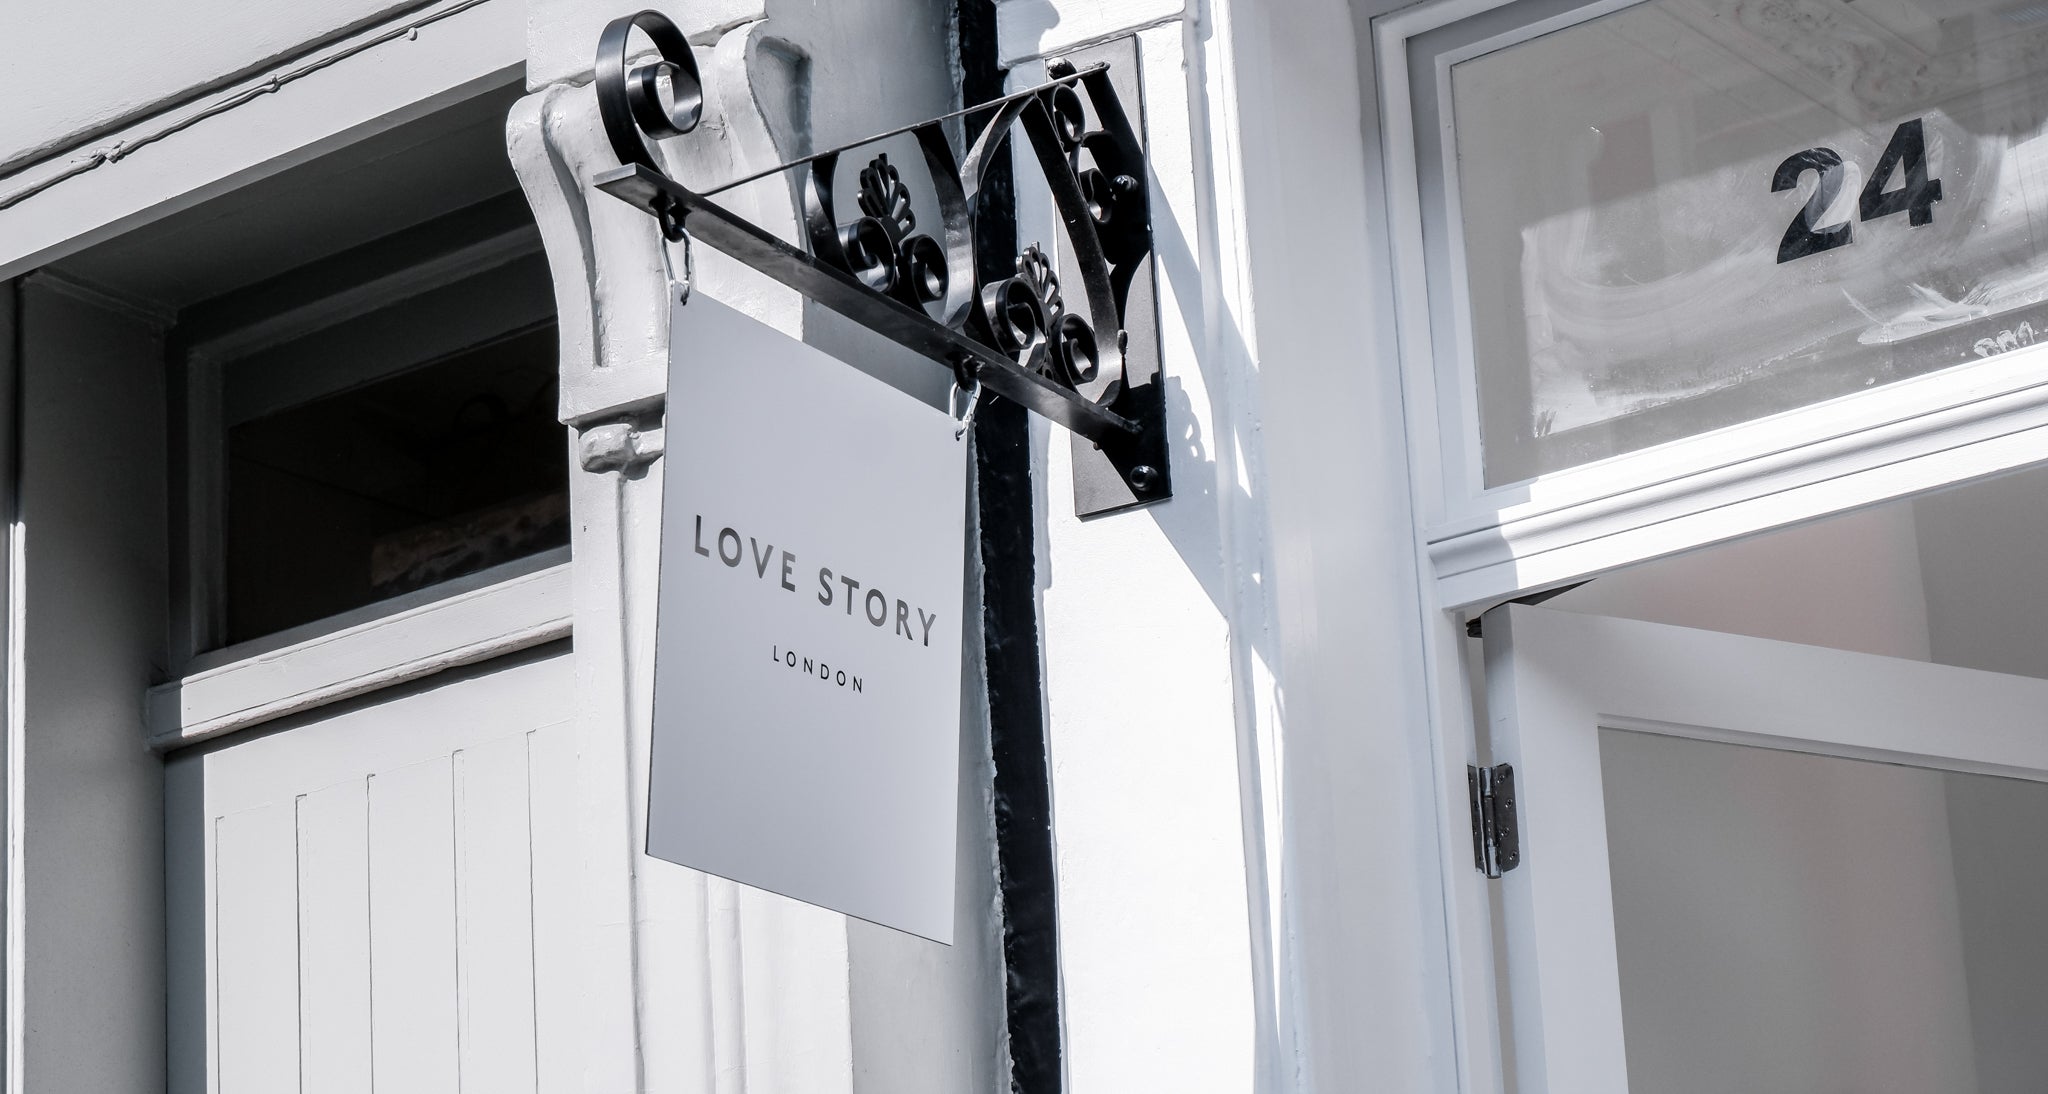 Take a look inside the Love Story London bridal studio, located in Connaught Village